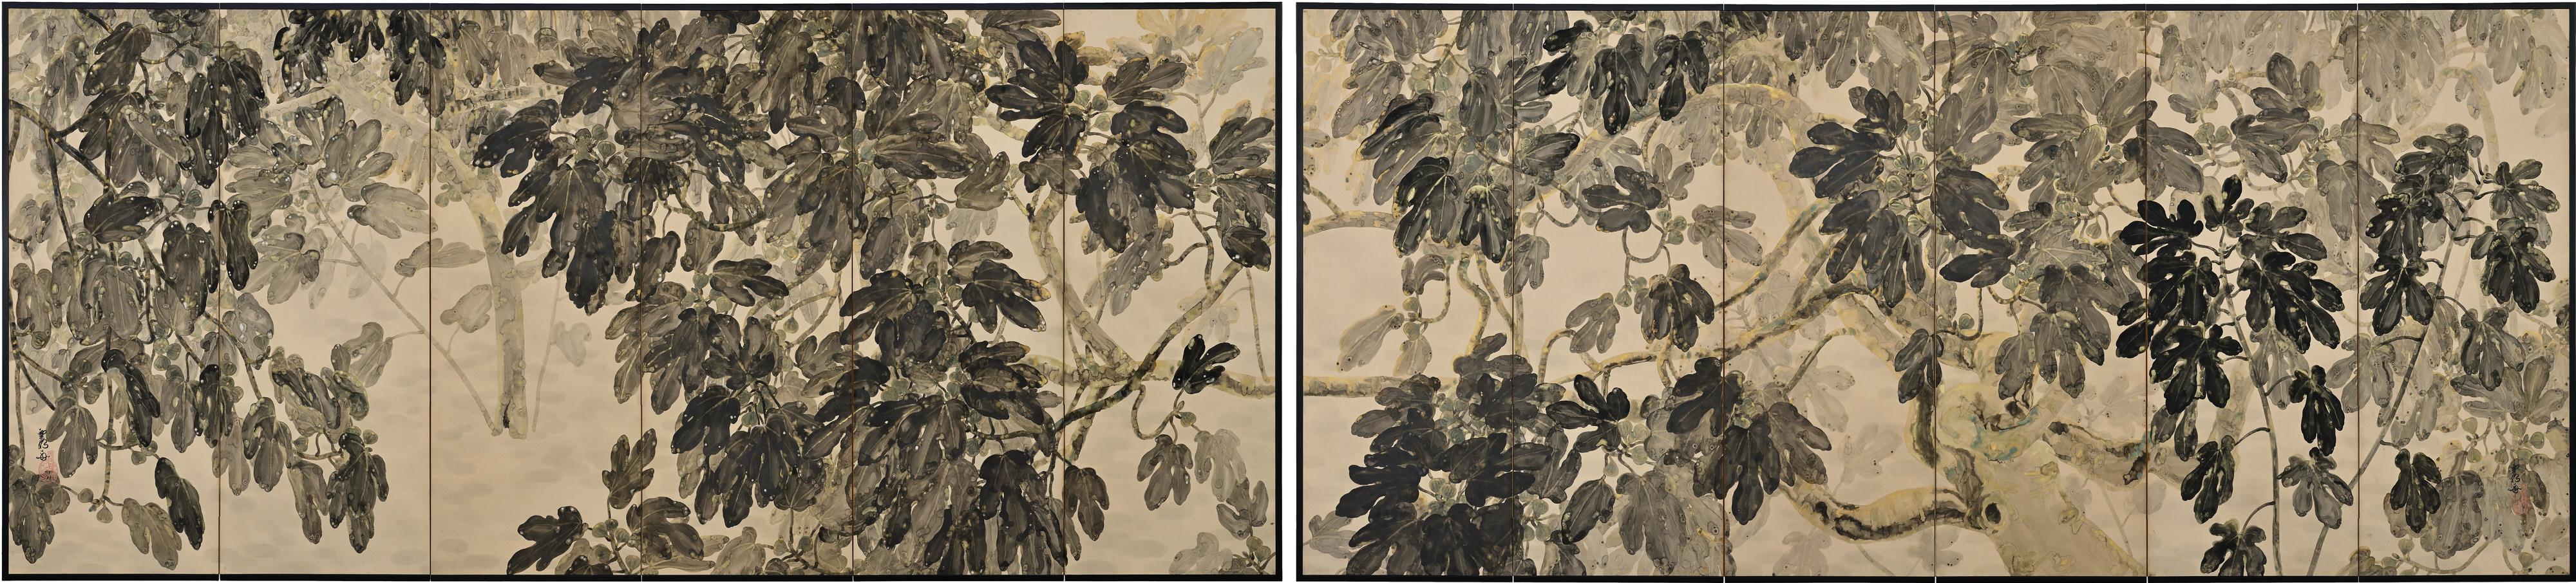 Fig Trees

Hiroe Kashu (b.1890)

Taisho era, circa 1920

Pair of six-fold Japanese screens

Ink, malachite, gold and silver on paper

Dimensions: 

Each Screen measures H. 67’’ x W. 148” (170 cm x 376 cm)

In this major work we are